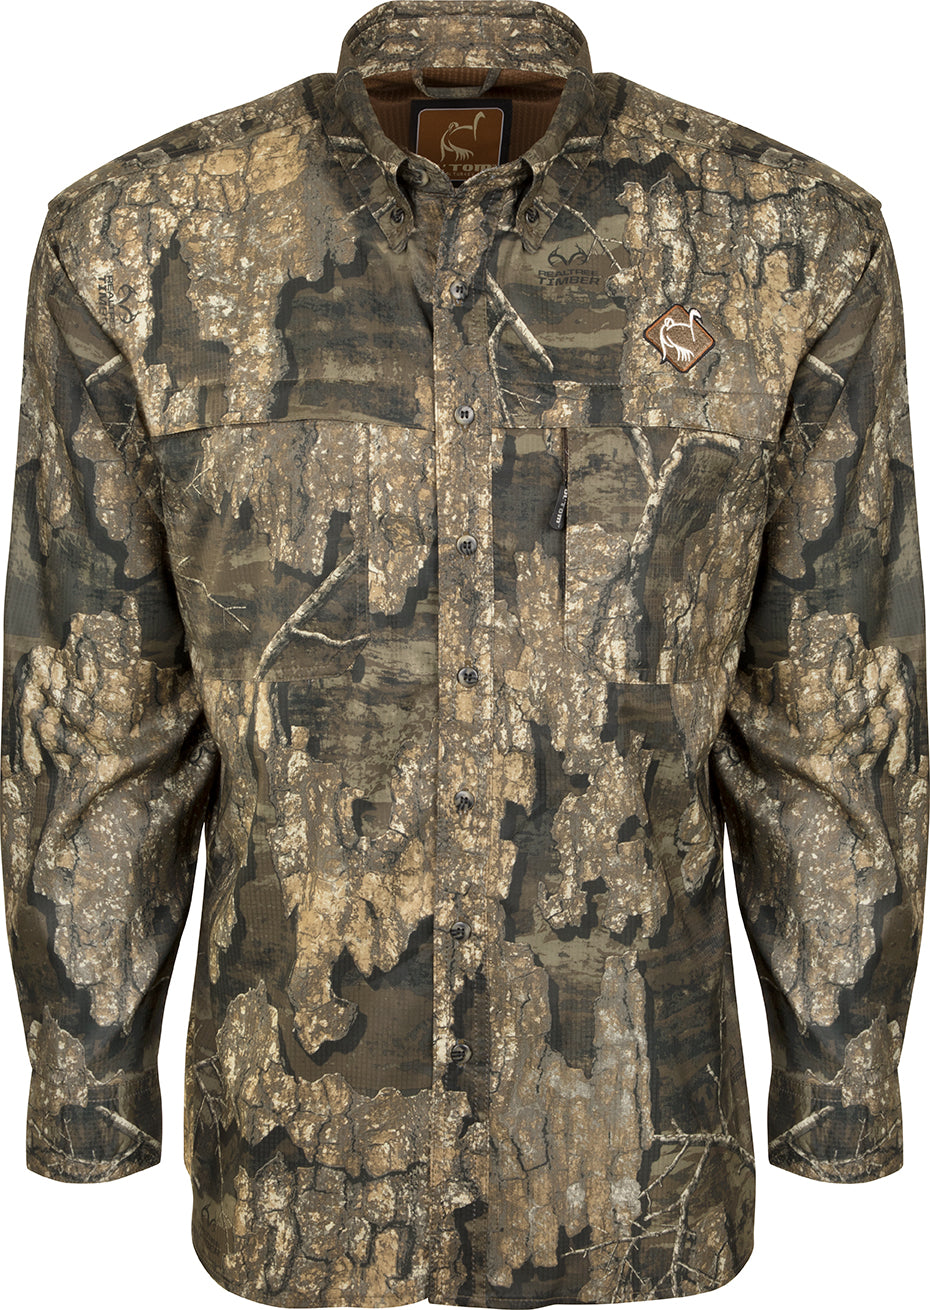 OL Tom Mesh Back Flyweight Shirt with Spine Pad Realtree Timber / Small